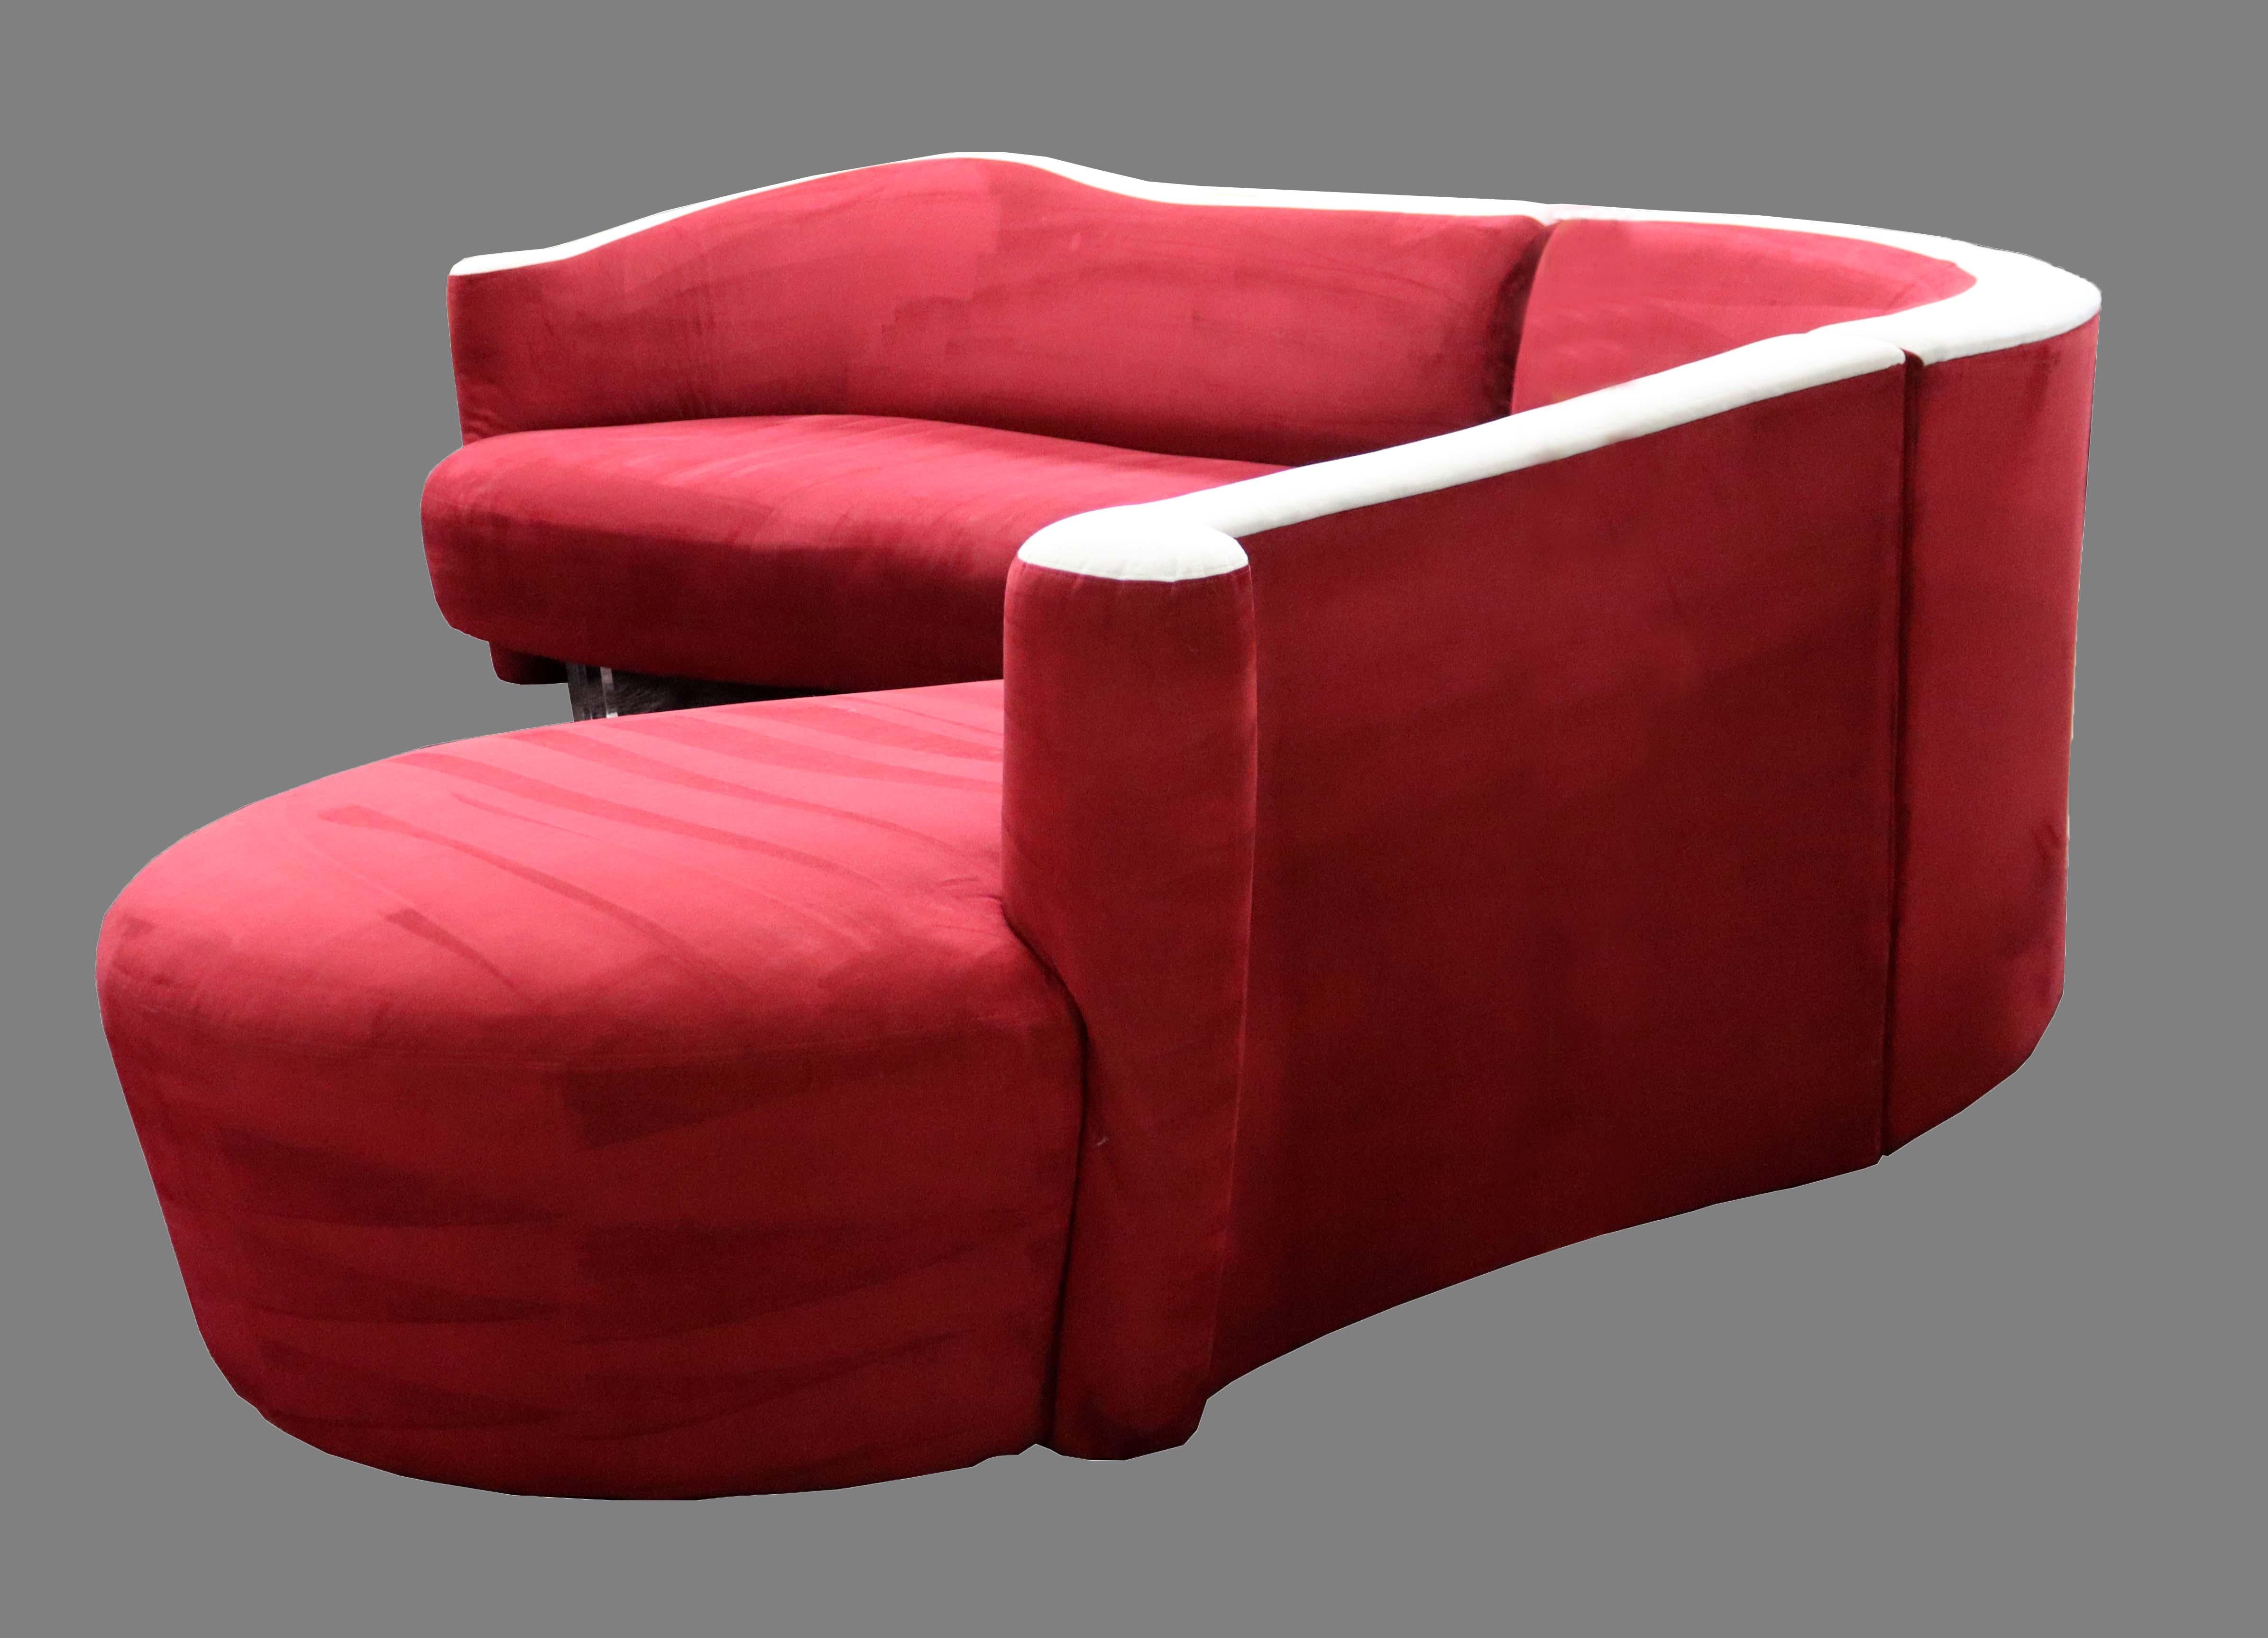 Up for offer is this spectacular 3-piece sectional sofa by Weiman Preview. This 'Cloud' sofa is upholstered in red with white ultrasuede upholstery featuring Lucite legs which make the sofa appear to be floating and would look stunning in any